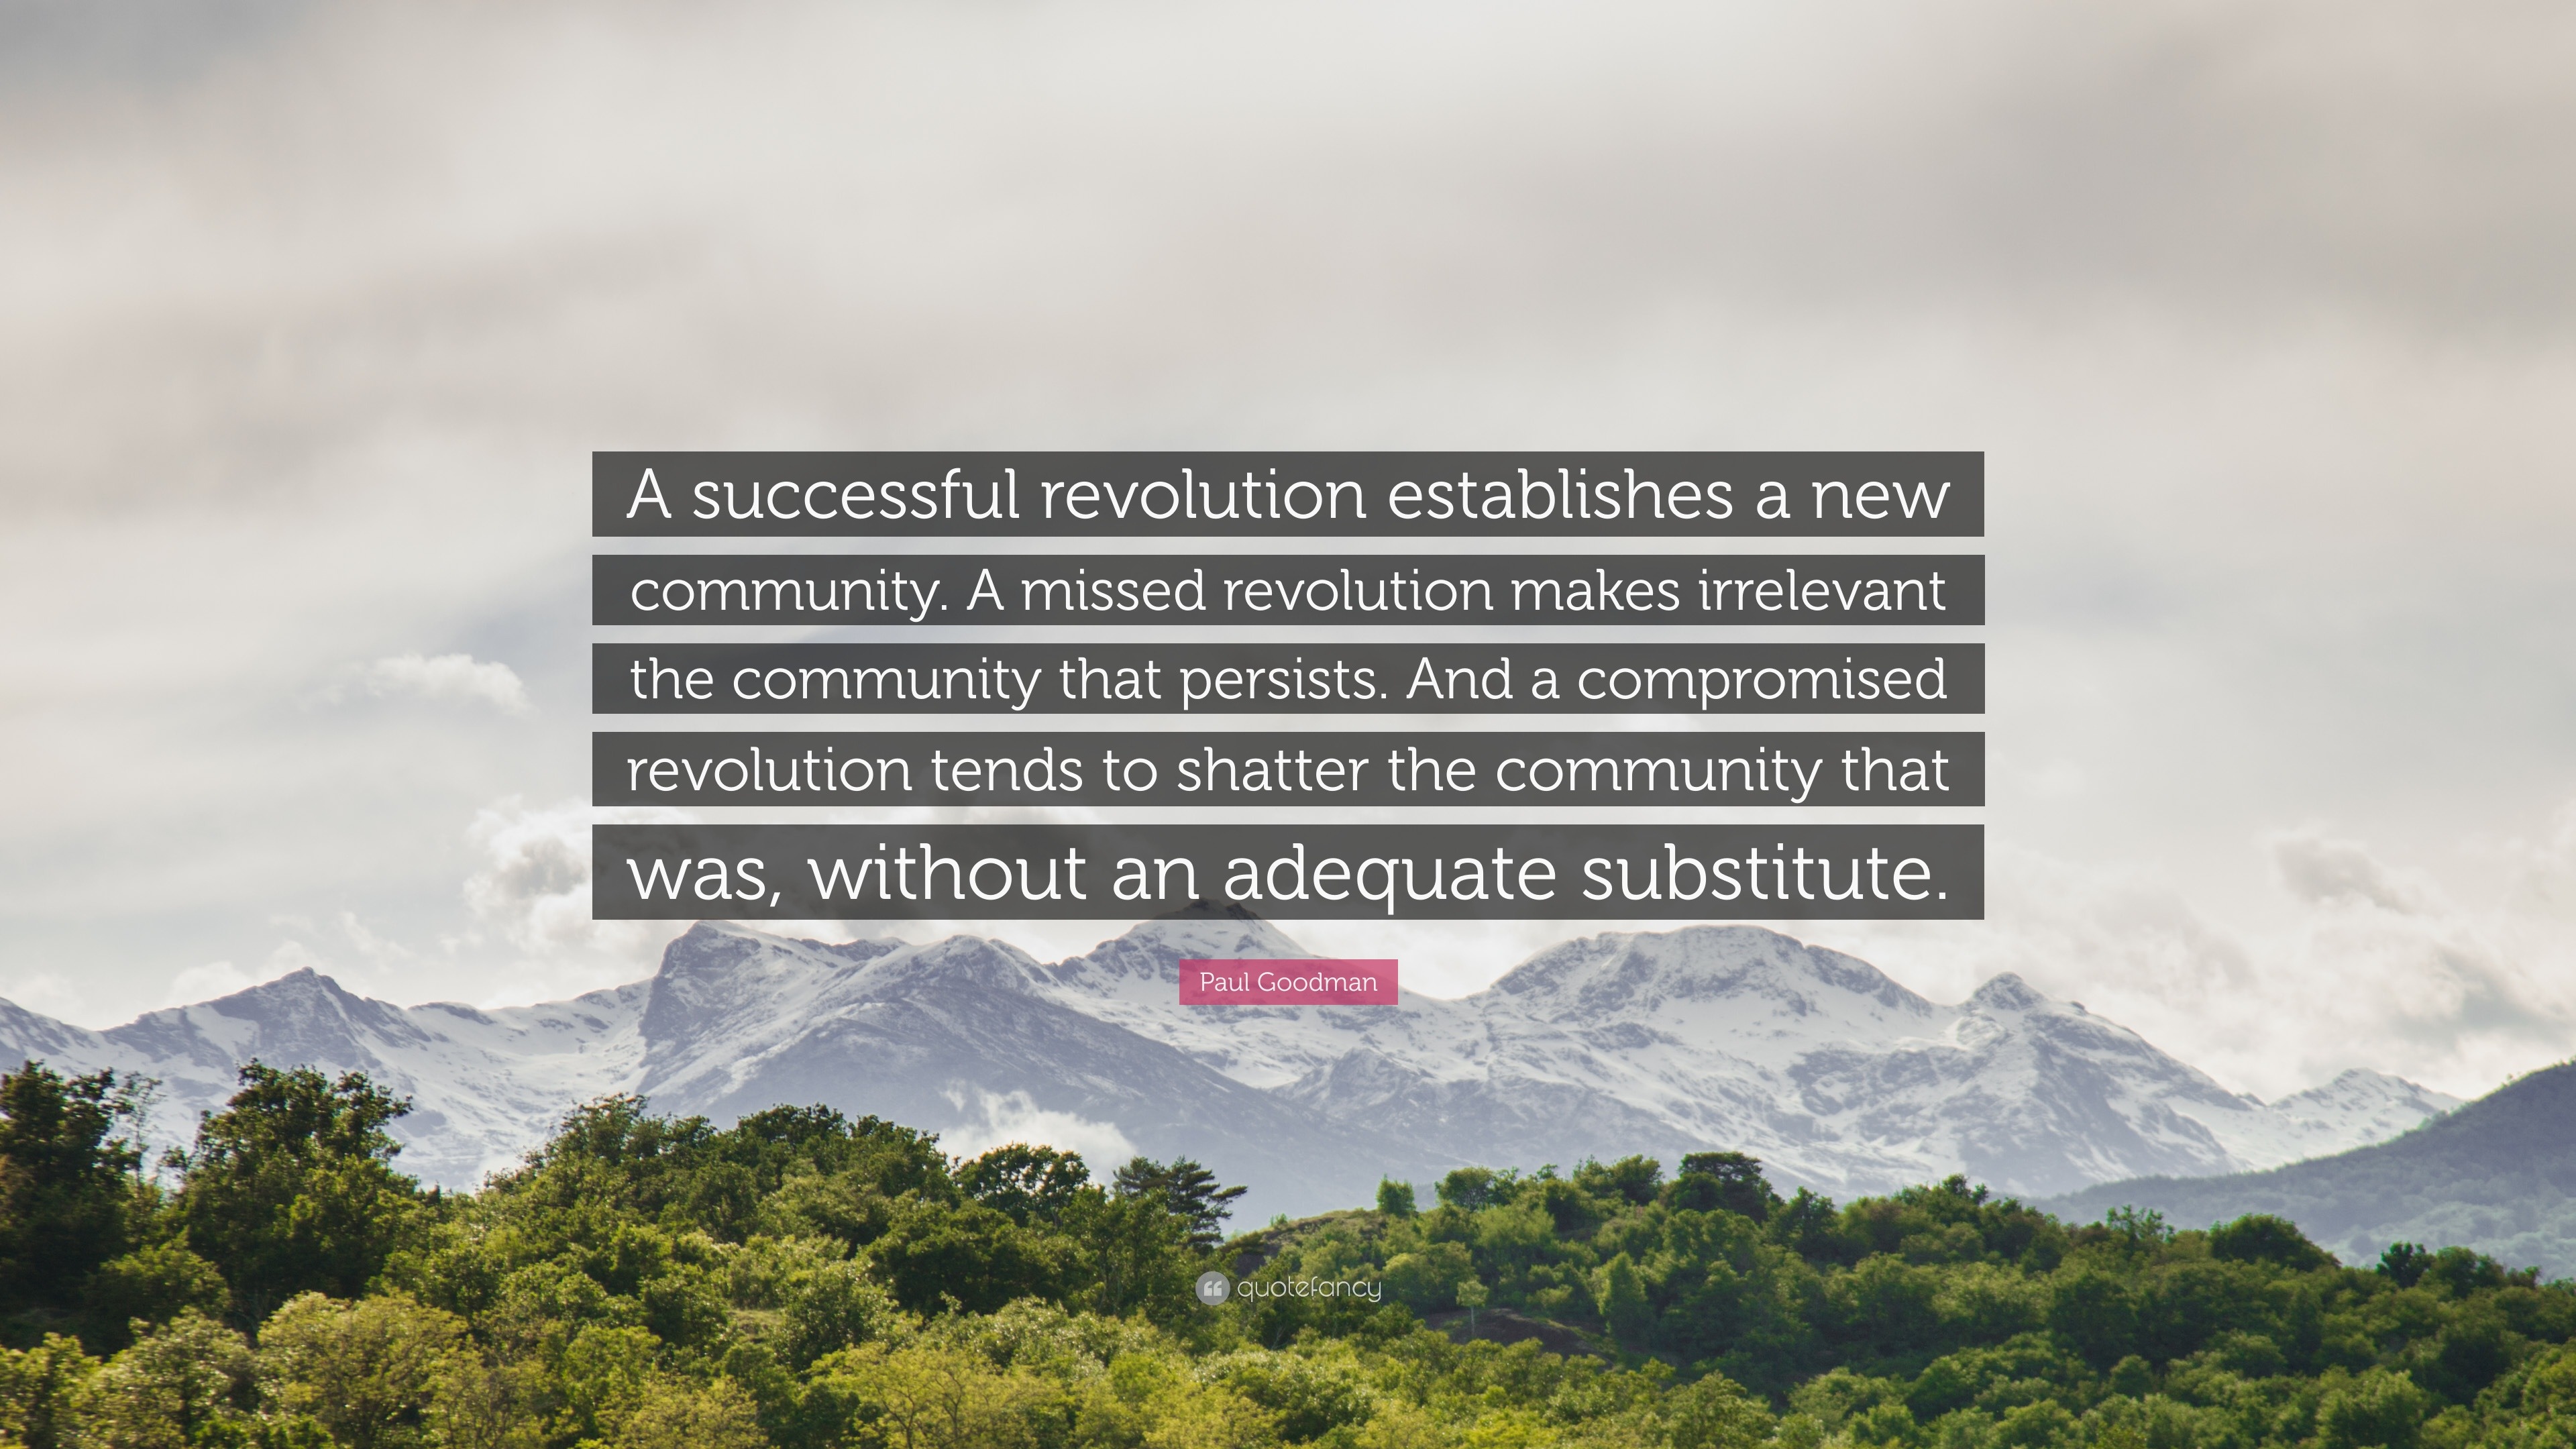 Paul Goodman Quote: “A successful revolution establishes a new community. A  missed revolution makes irrelevant the community that persists. A”